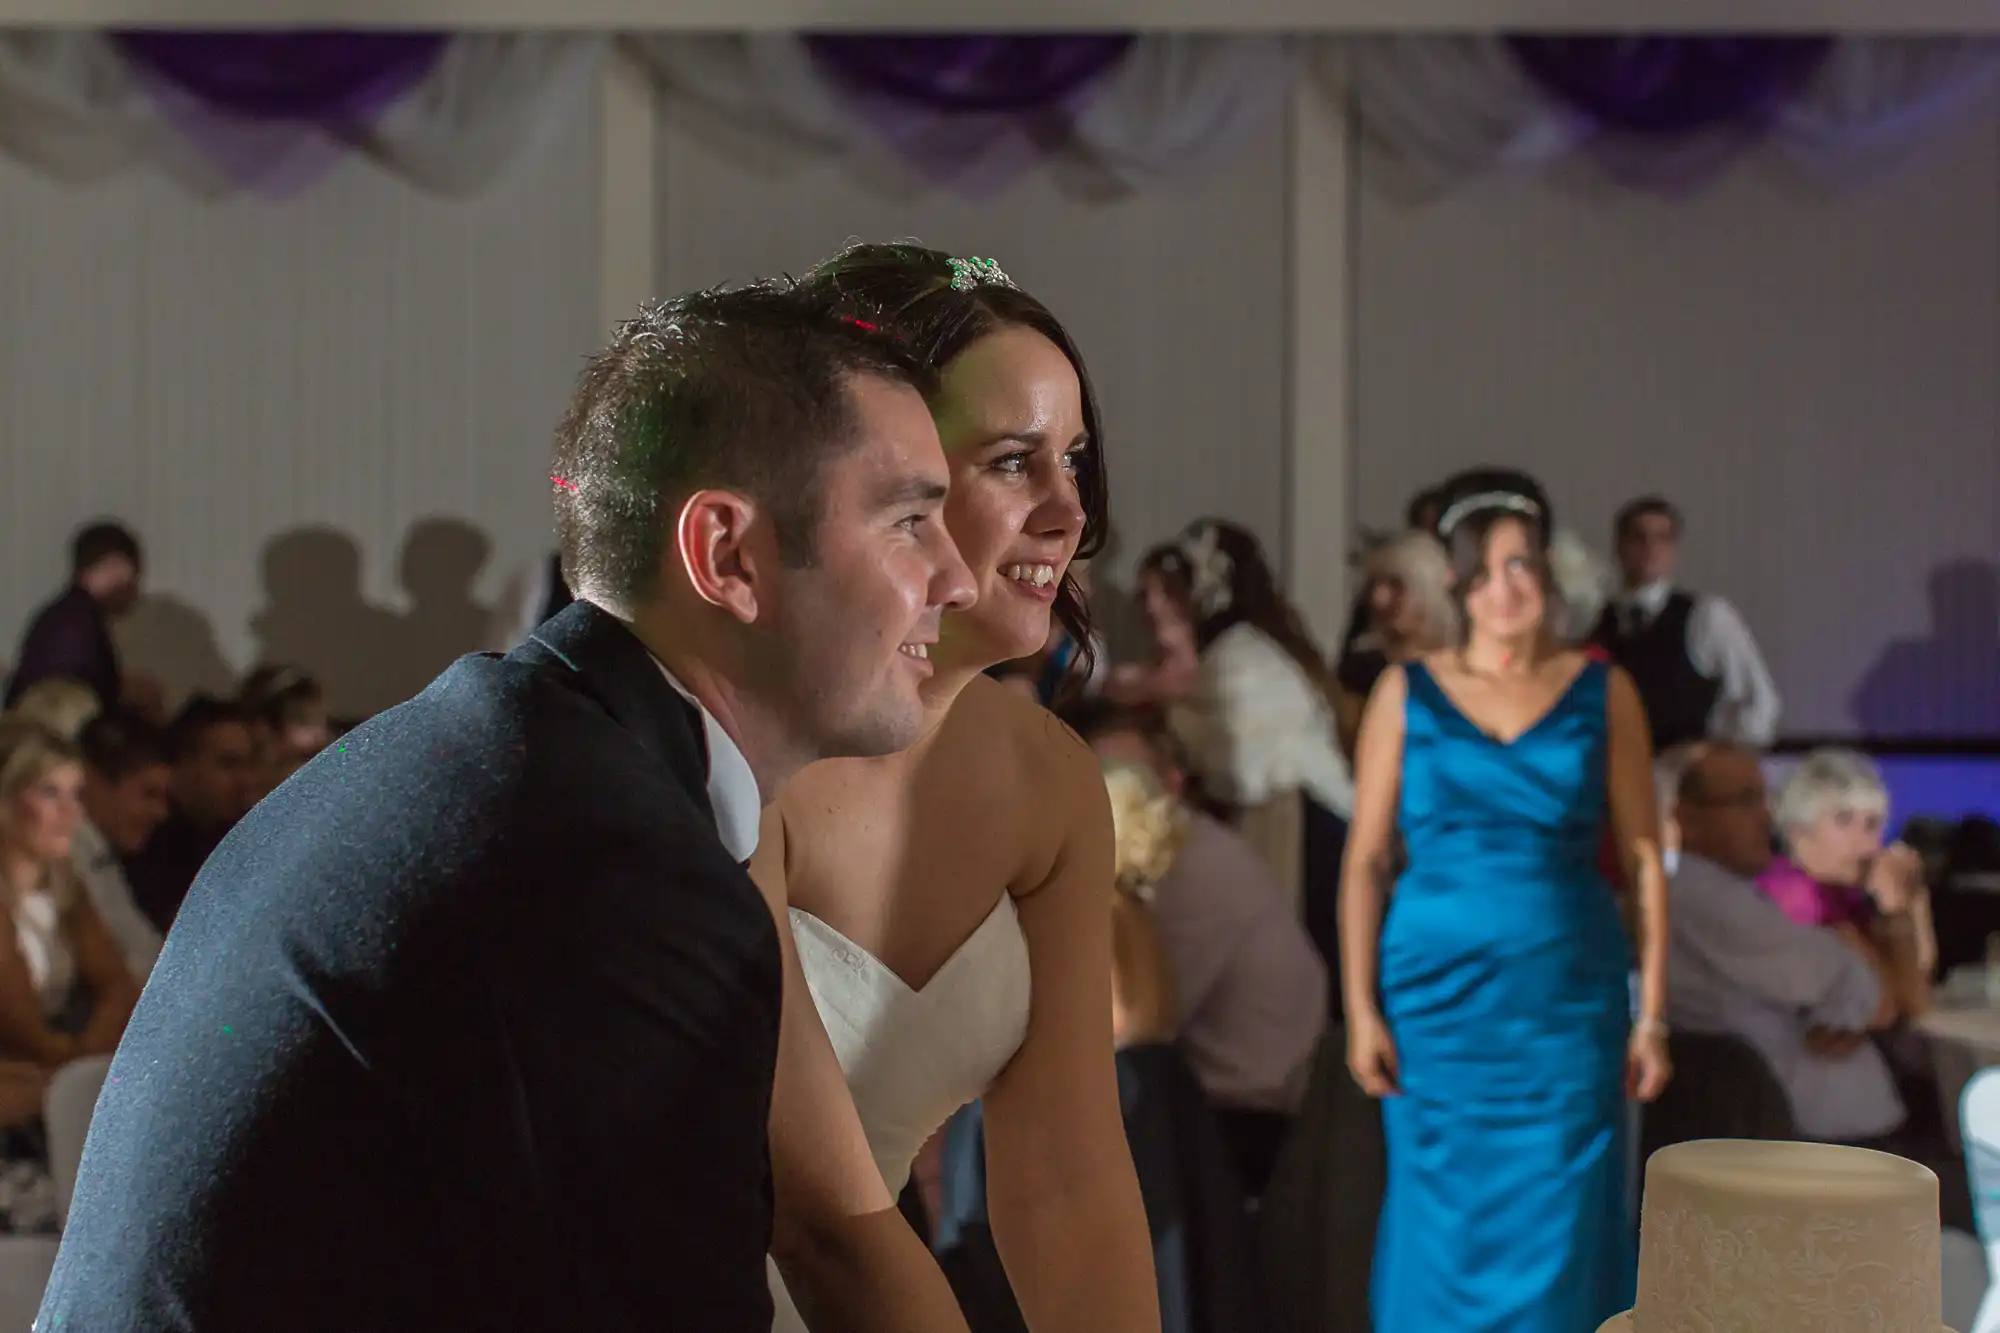 A bride and groom, smiling and looking ahead, sitting during a wedding reception, with guests in the background.